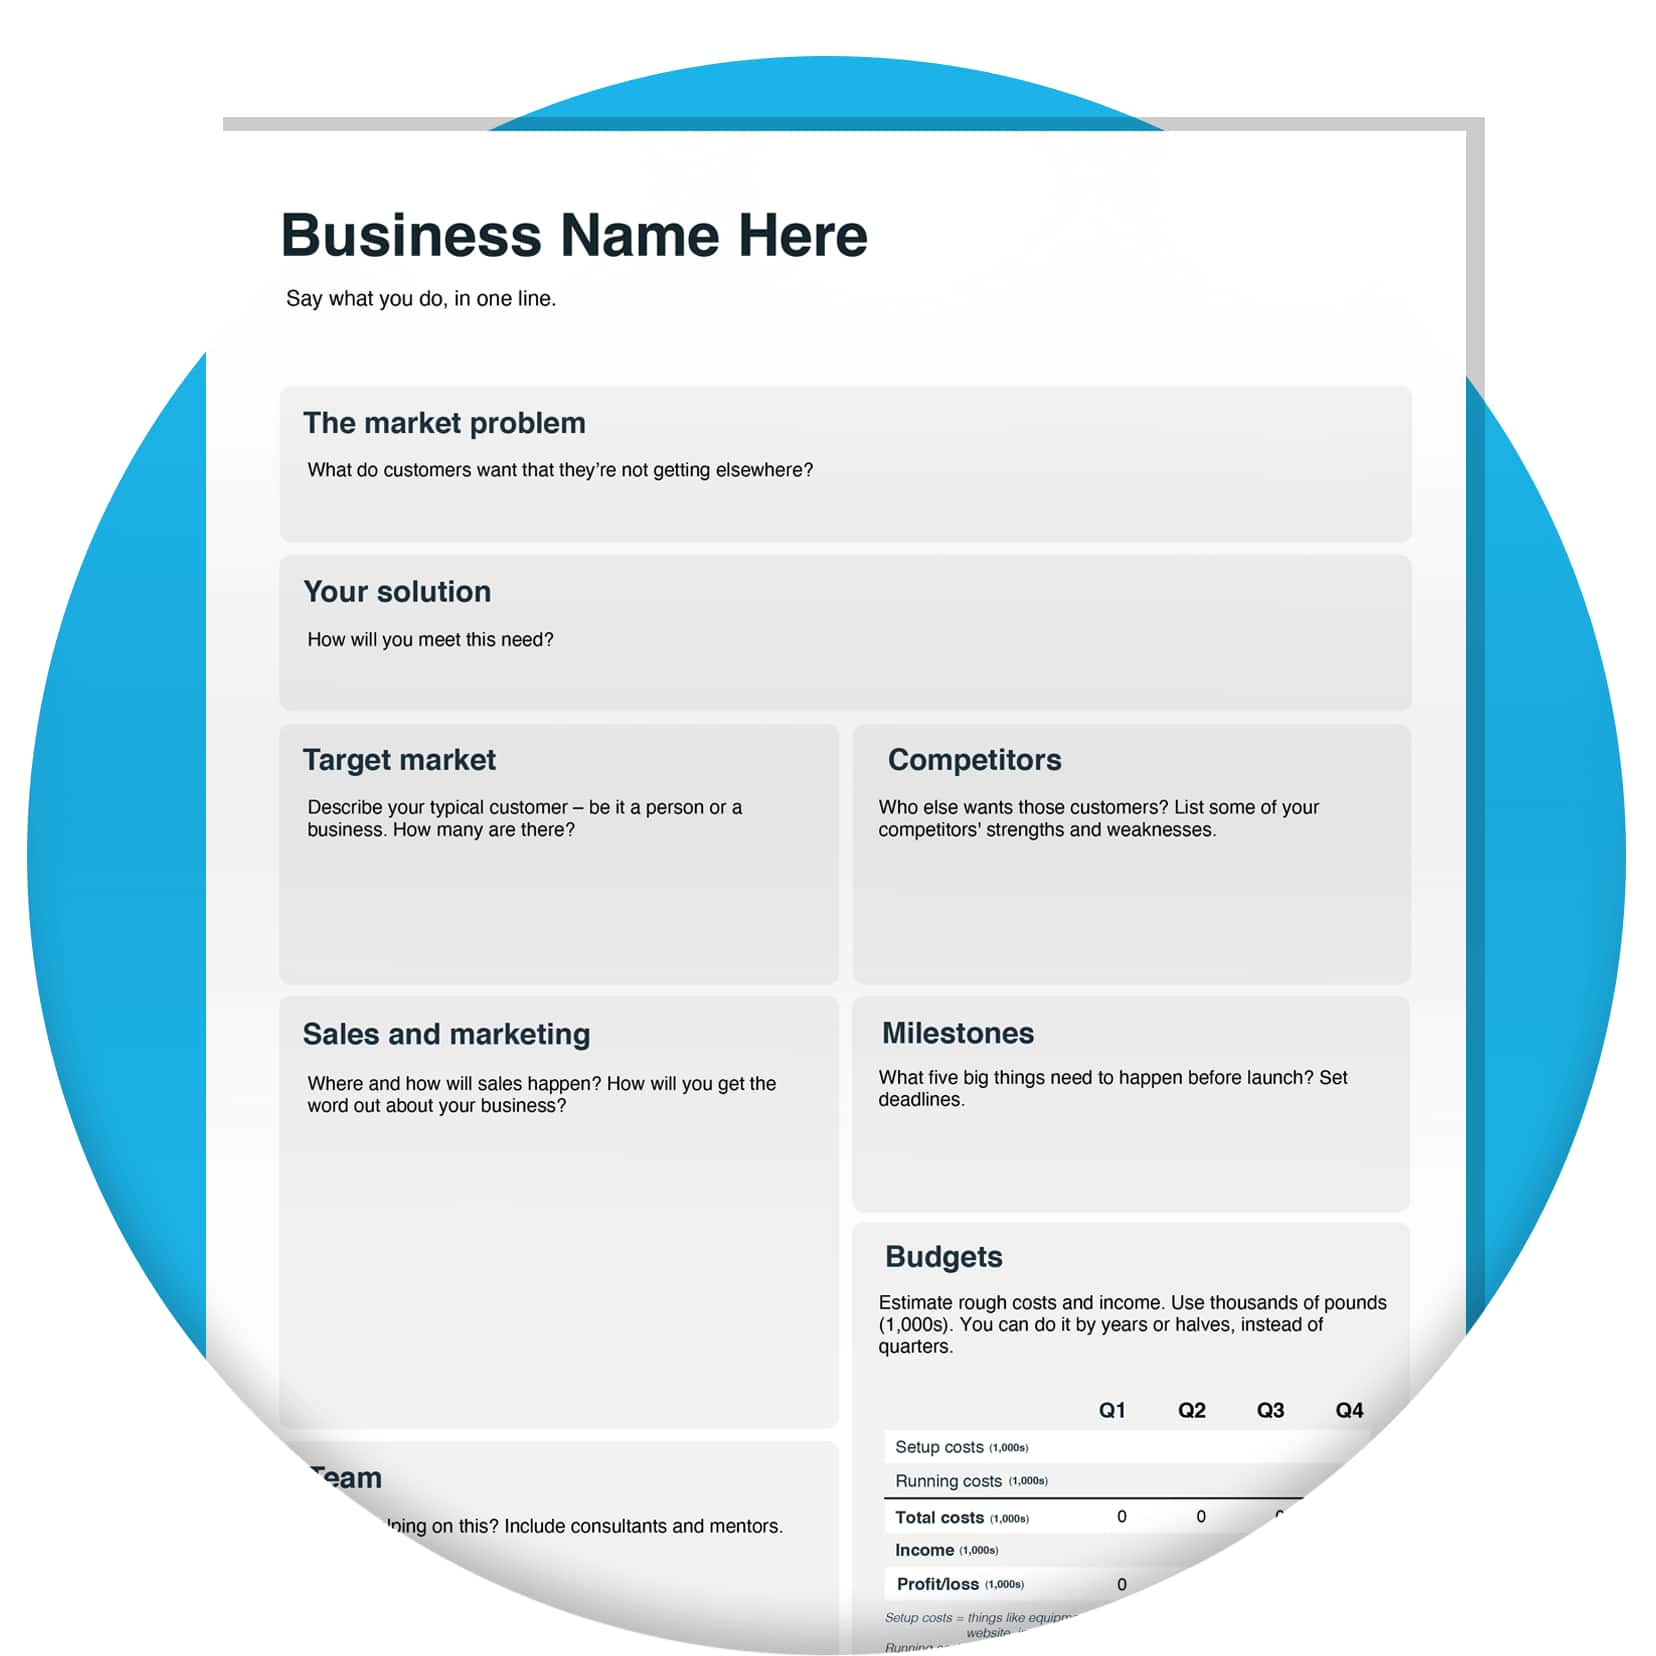 Business plan template with blank fields for users to fill out.